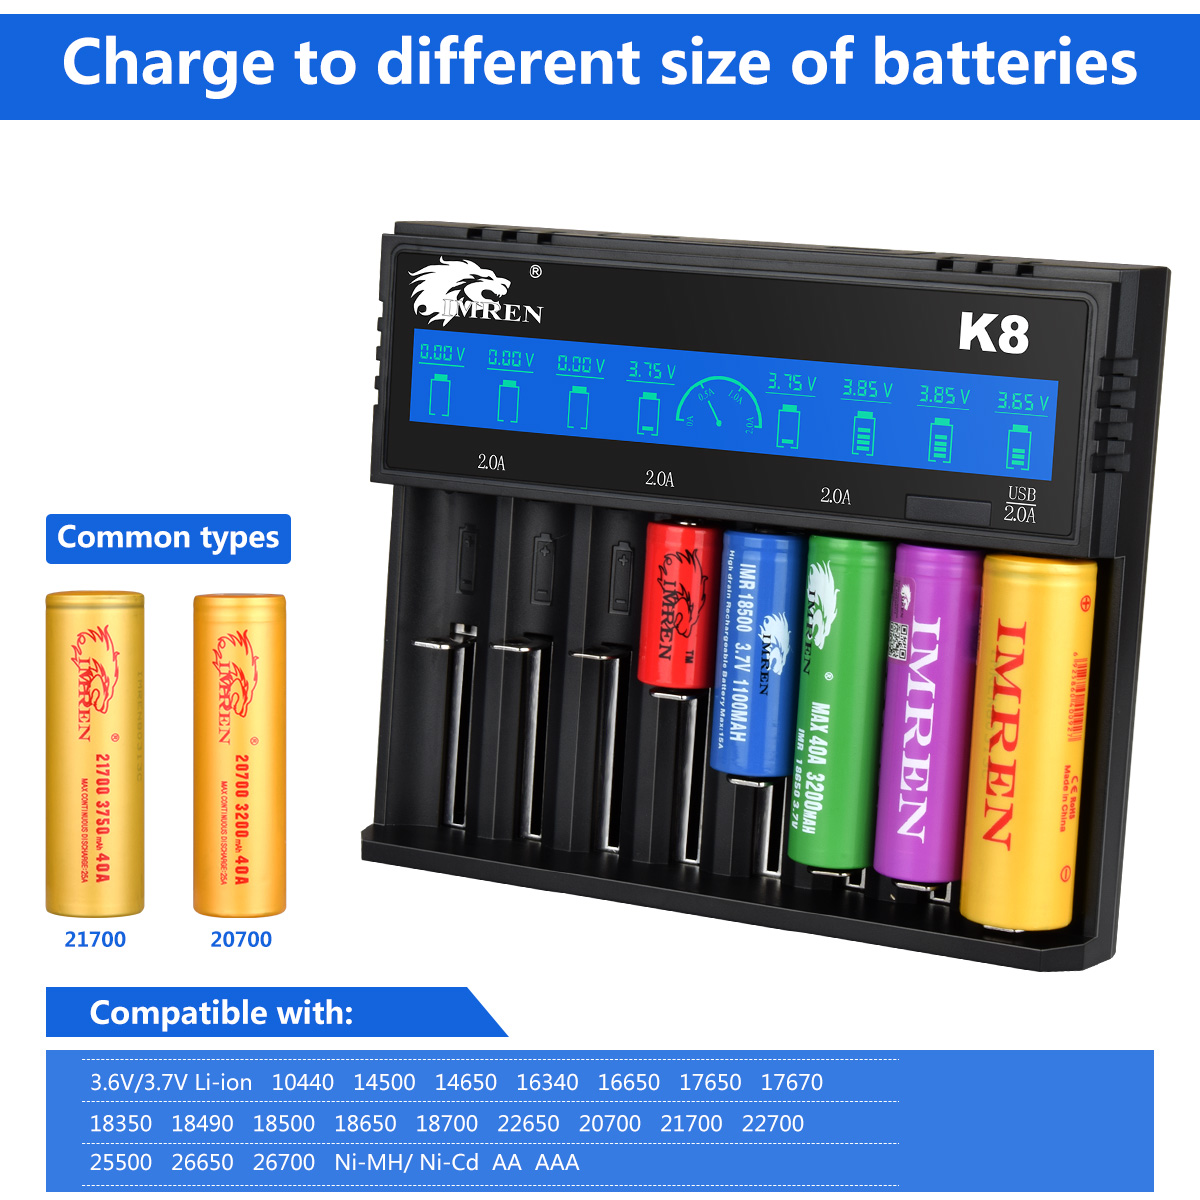 2 Bay IMREN 18650 Battery Charger for 3.7V Li-ion Rechargeable Battery 18650 18490 18350 17670 17500 16340 14500 21700 Lithium Battery 